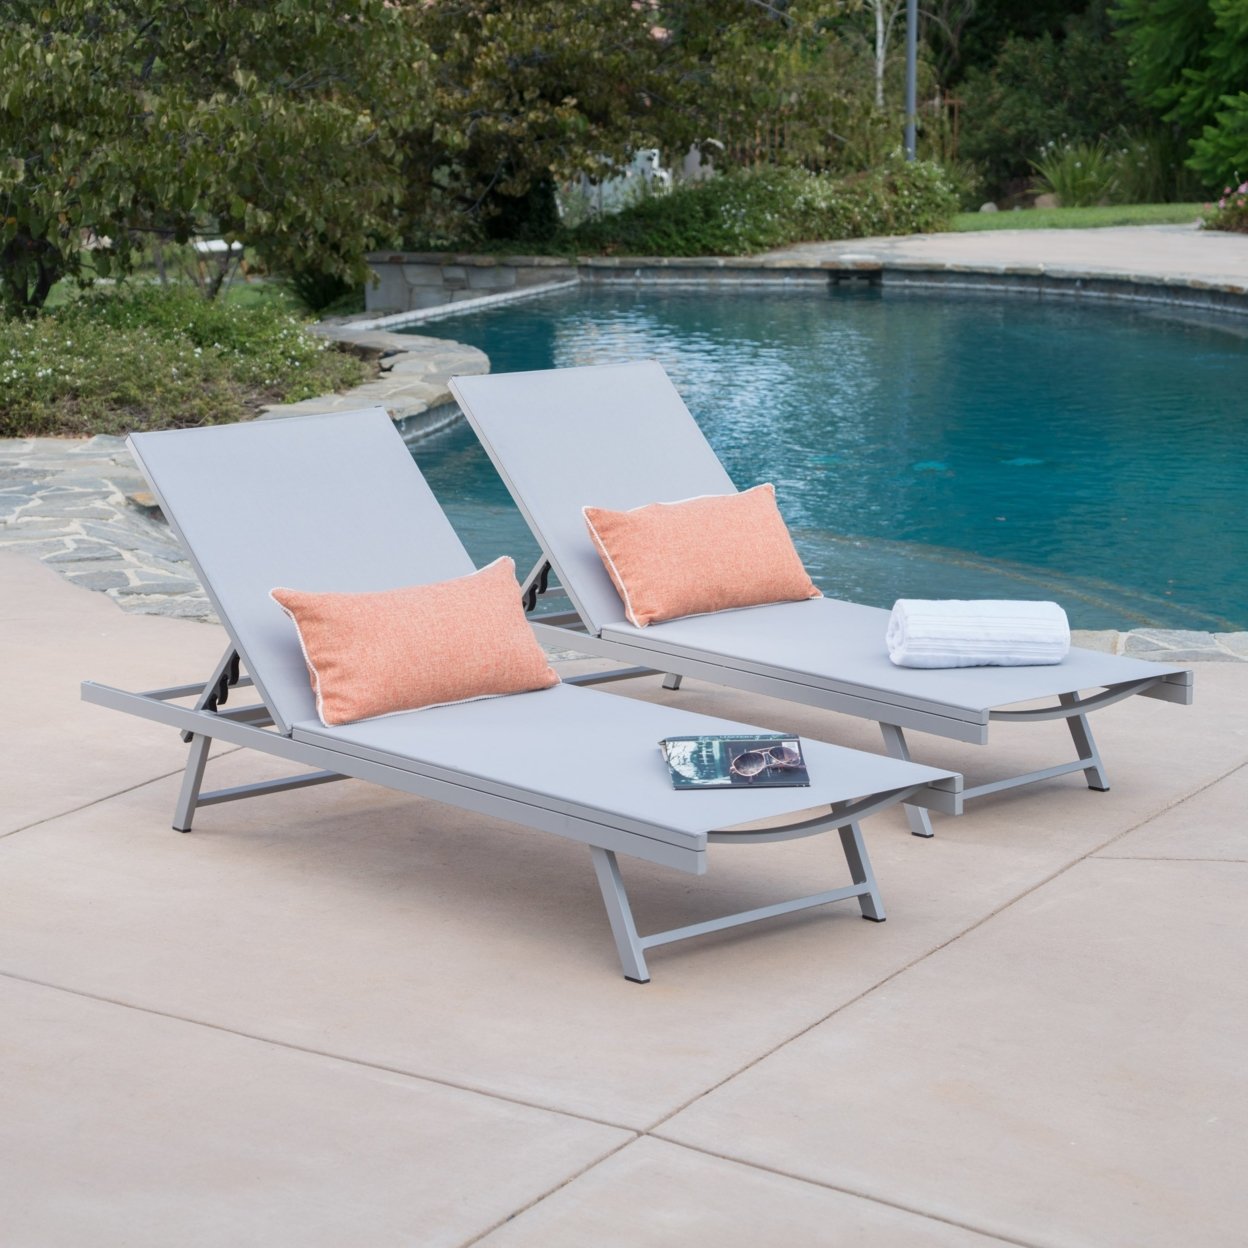 Allen Outdoor Gray Mesh Chaise Lounge With Aluminum Frame - Gray, Set Of 2